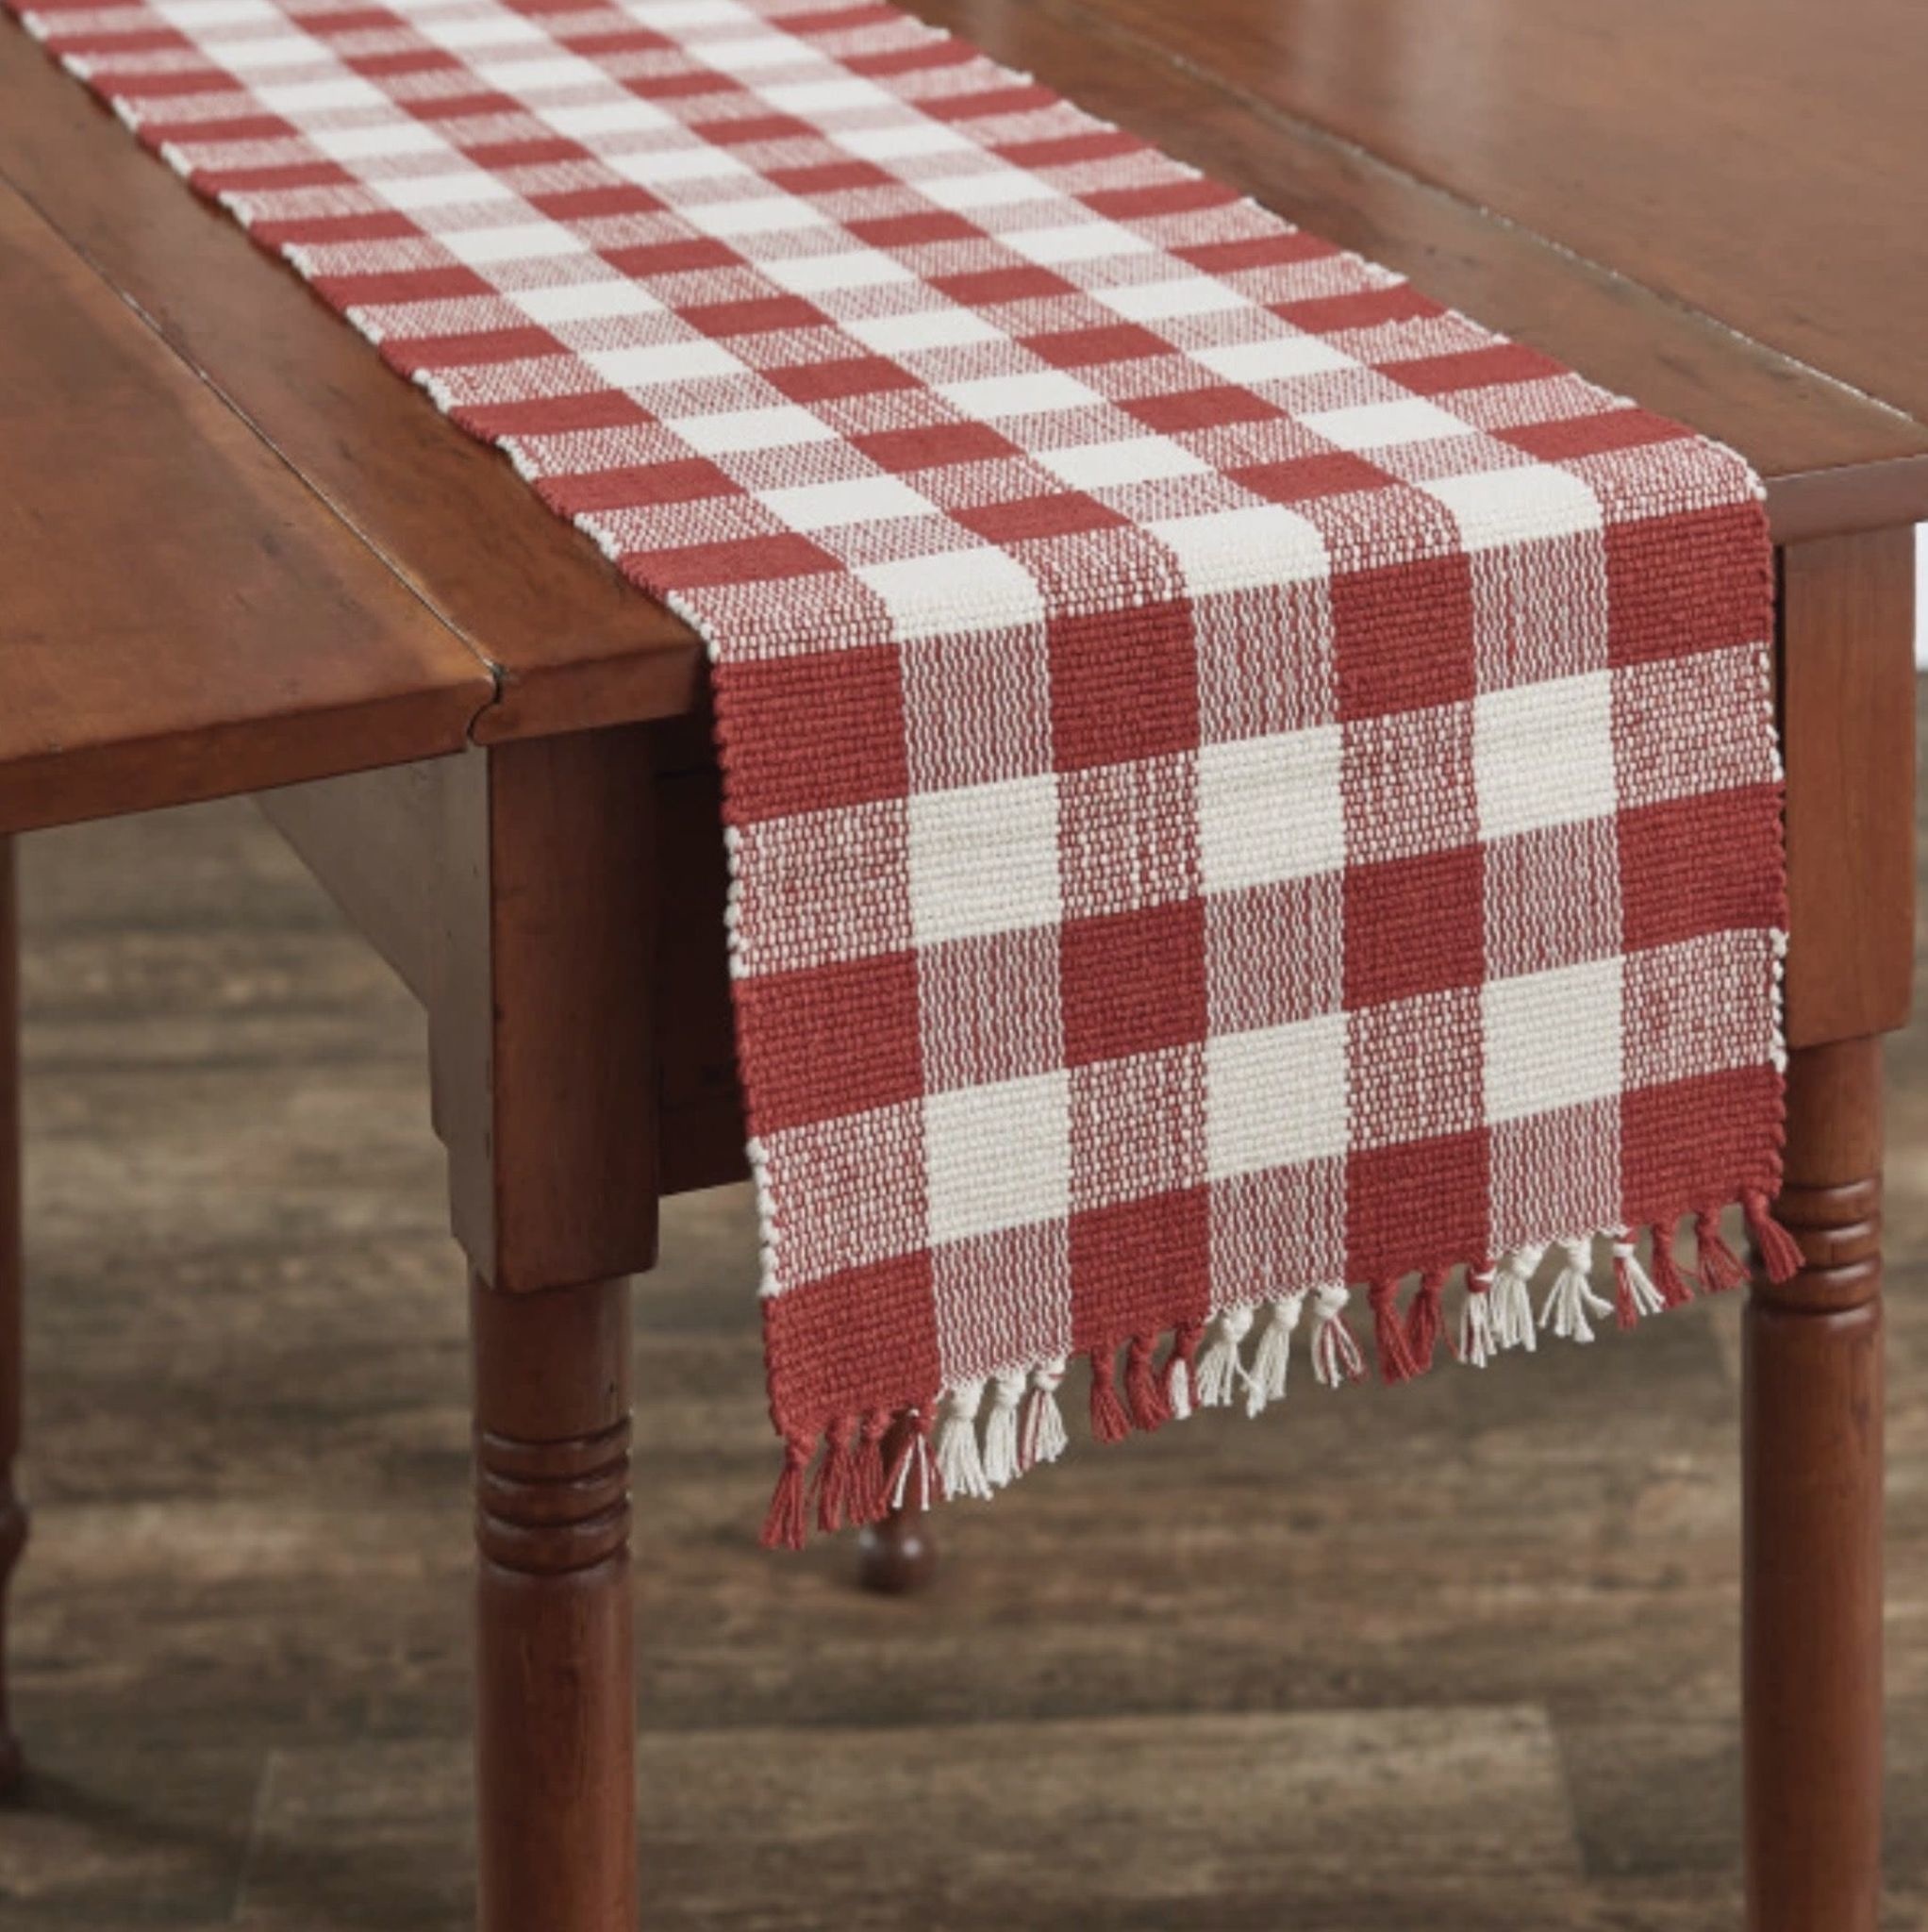 Park Designs Wicklow Check Table Runner Red & Cream - 13x54 Brand: Park Designs